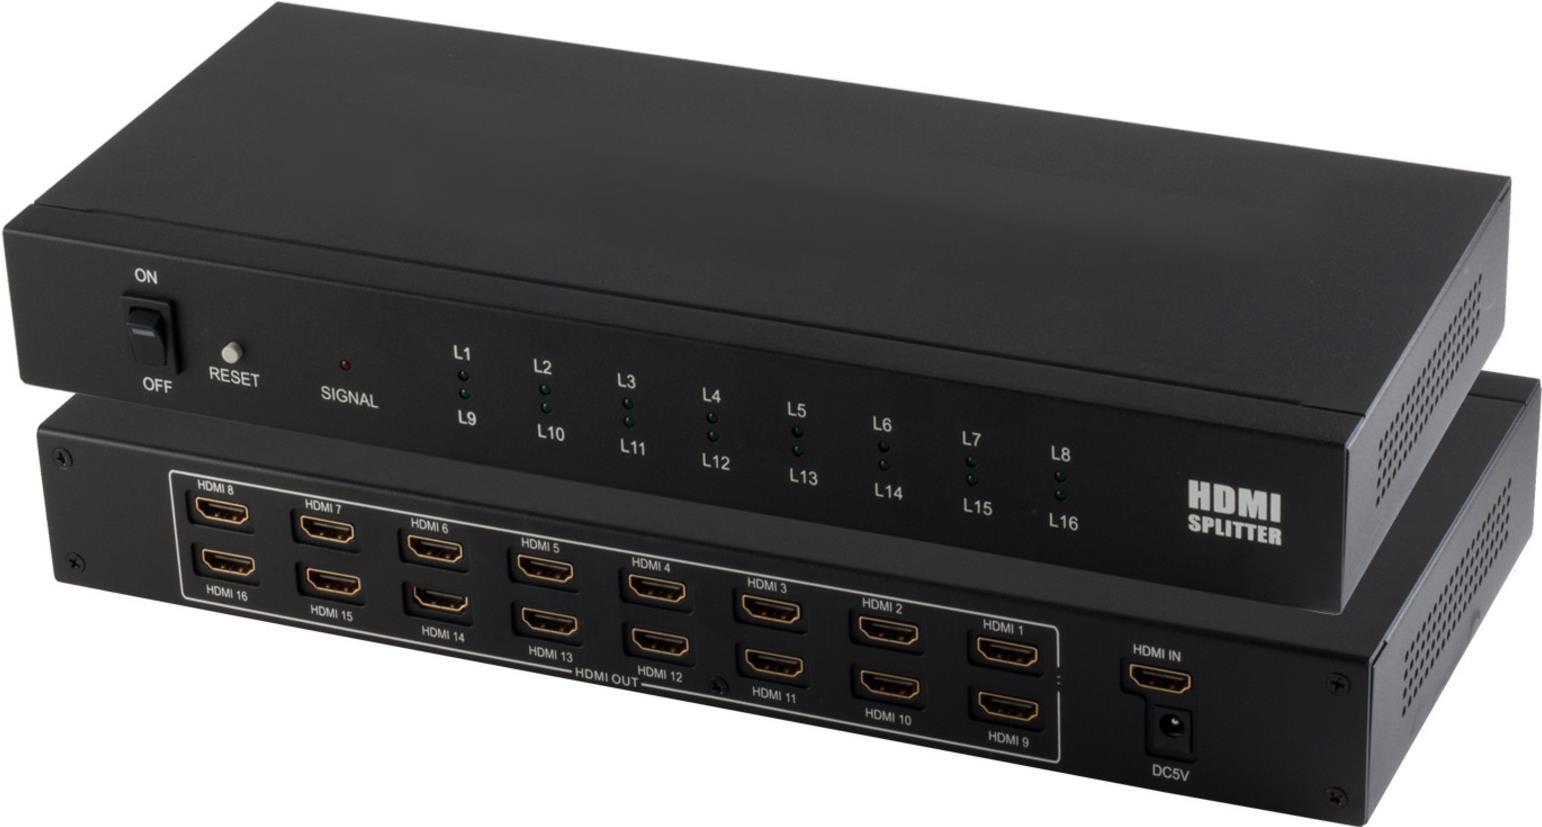 SHIVERPEAKS S/CONN maximum connectivity HDMI Splitter, 1x In 16x OUT, 4K2K (05-03016)